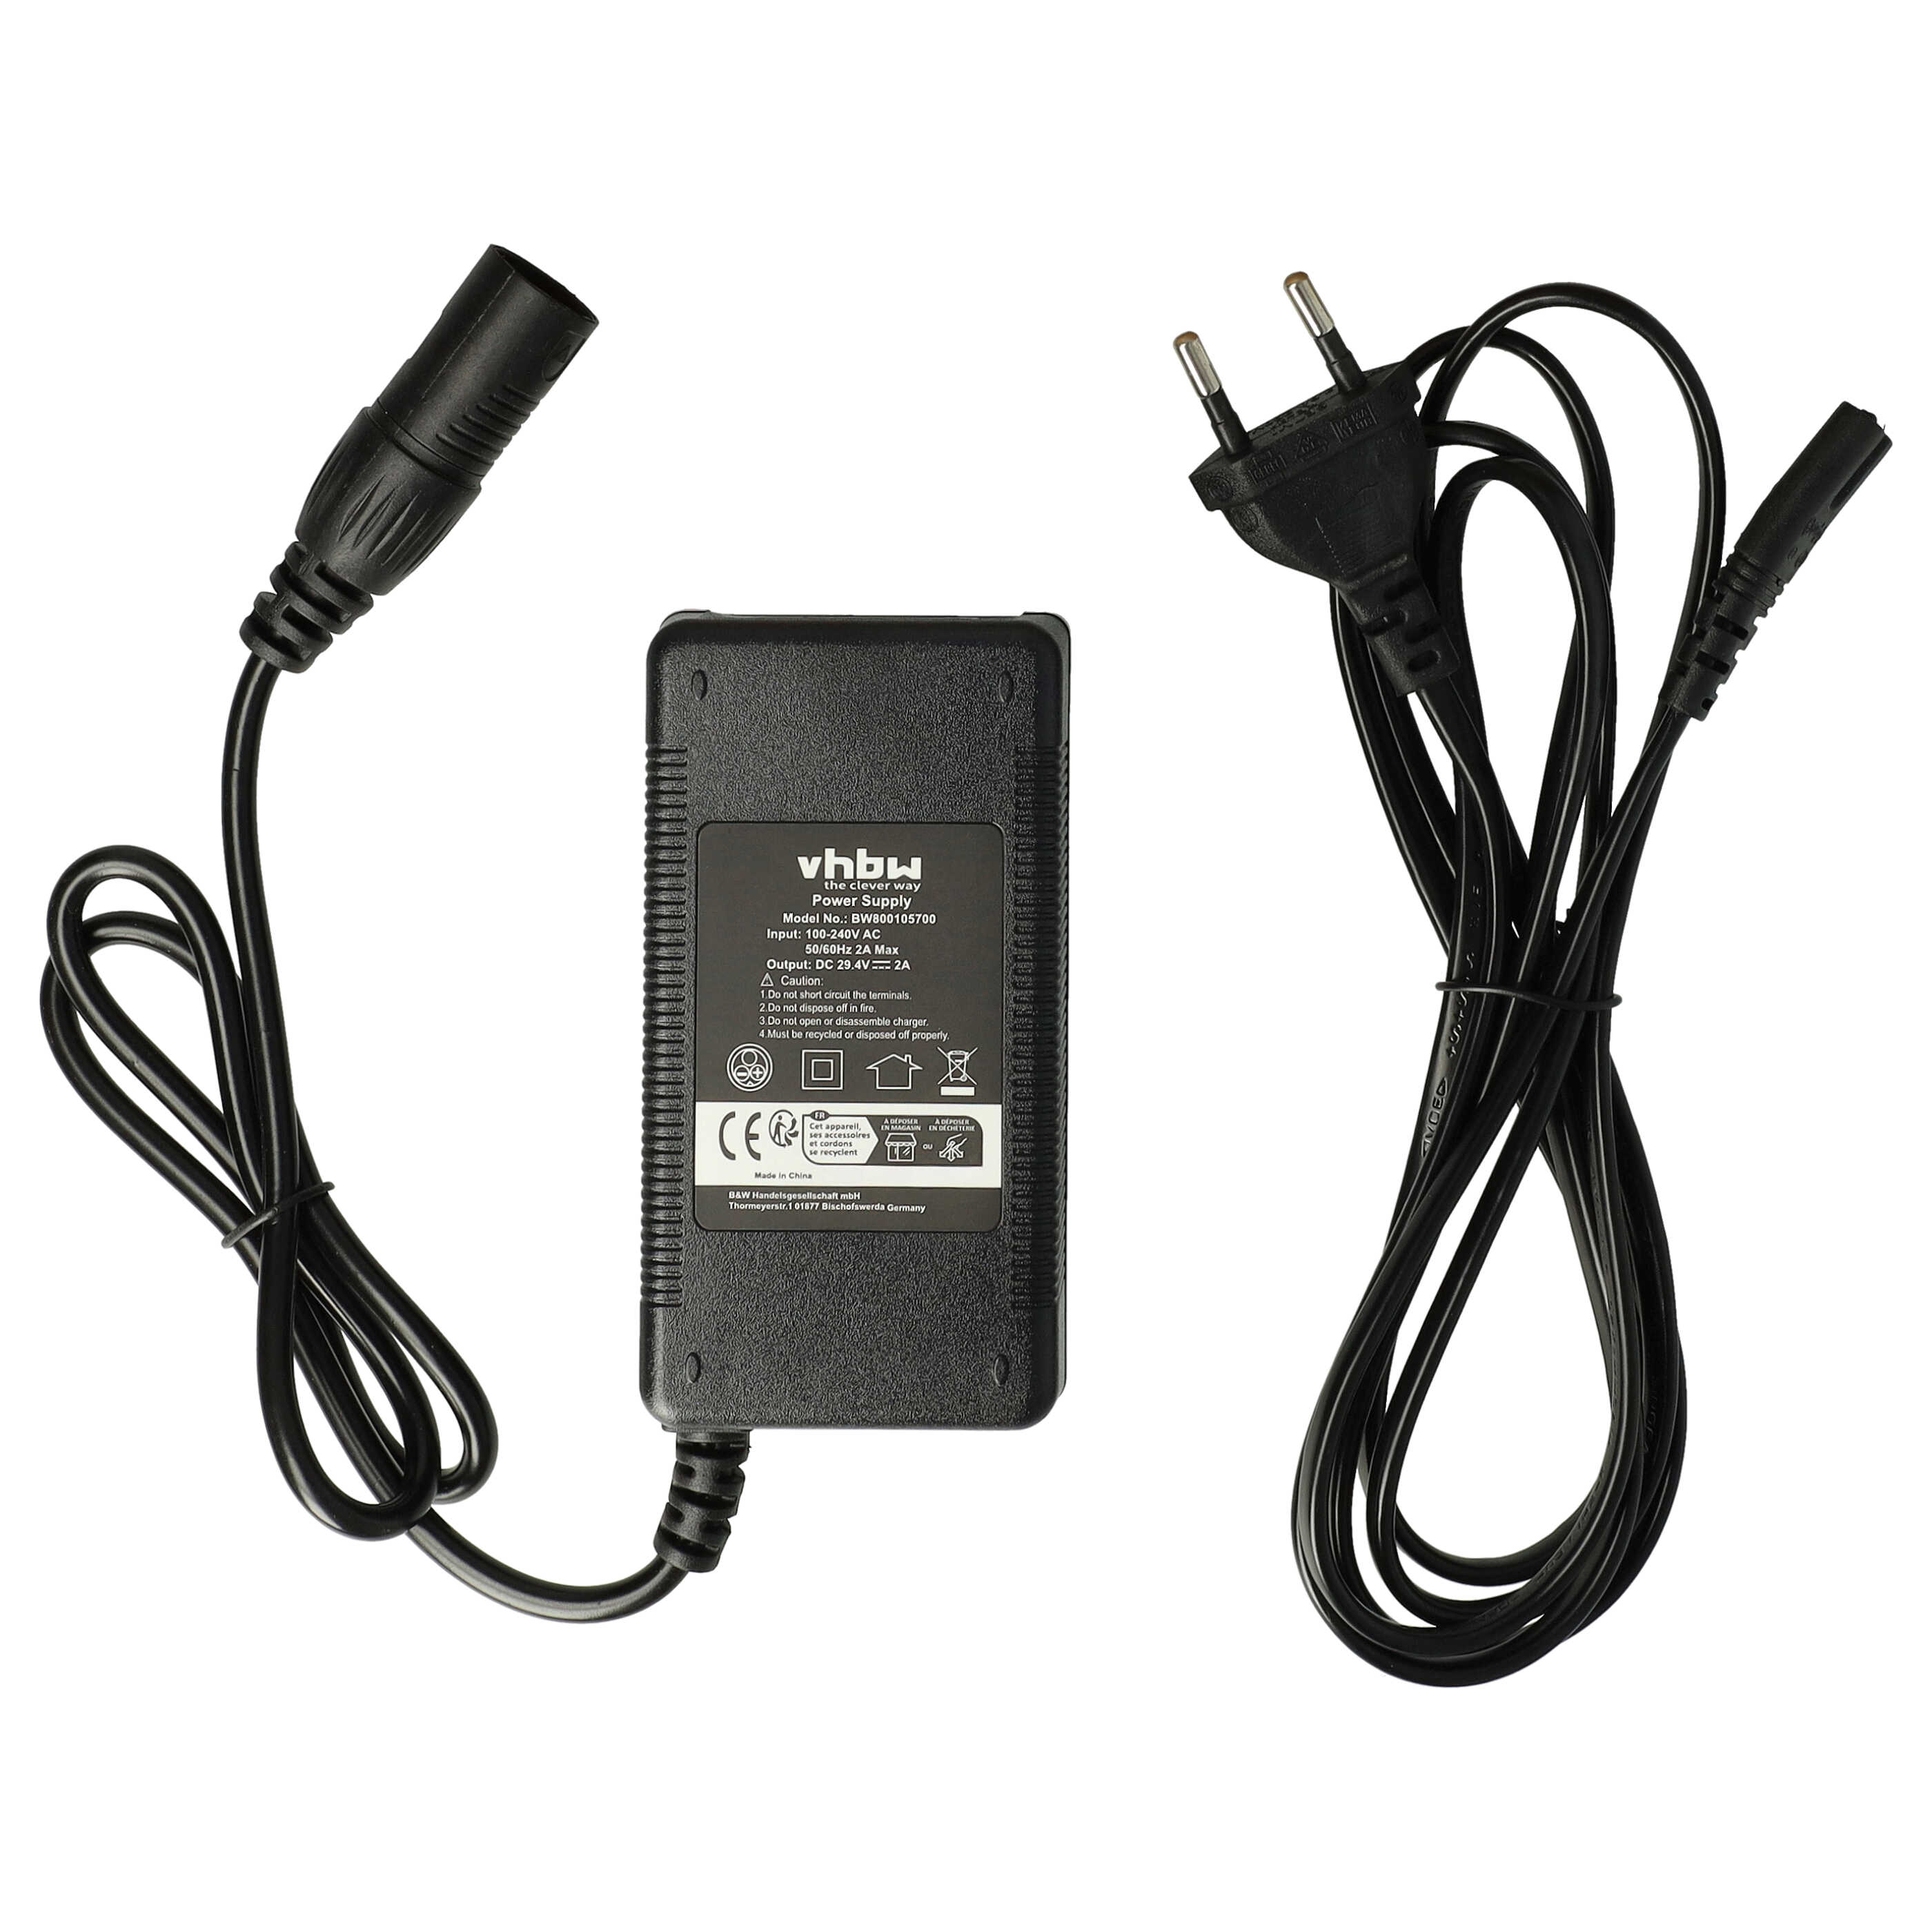 Charger replaces HP1202L2 for Li-Ion E-Bike Battery etc. - With 3 Pin Connector, With XLR Connector, 2.35 A